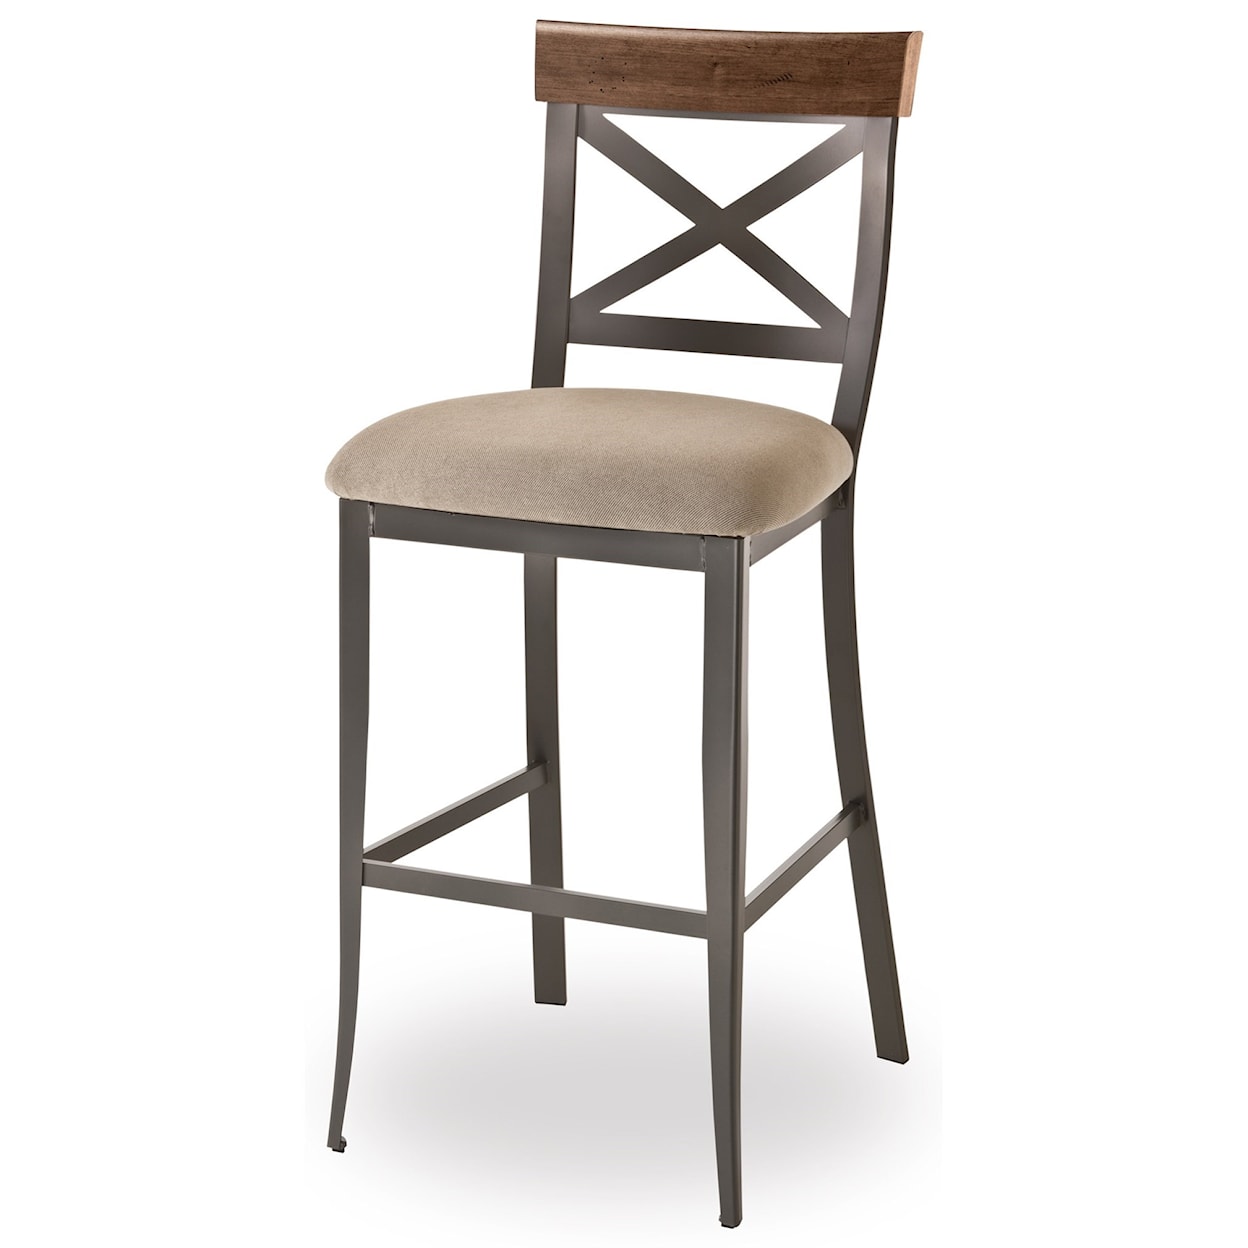 Amisco Industrial 30" Kyle Stool with Upholstered Seat